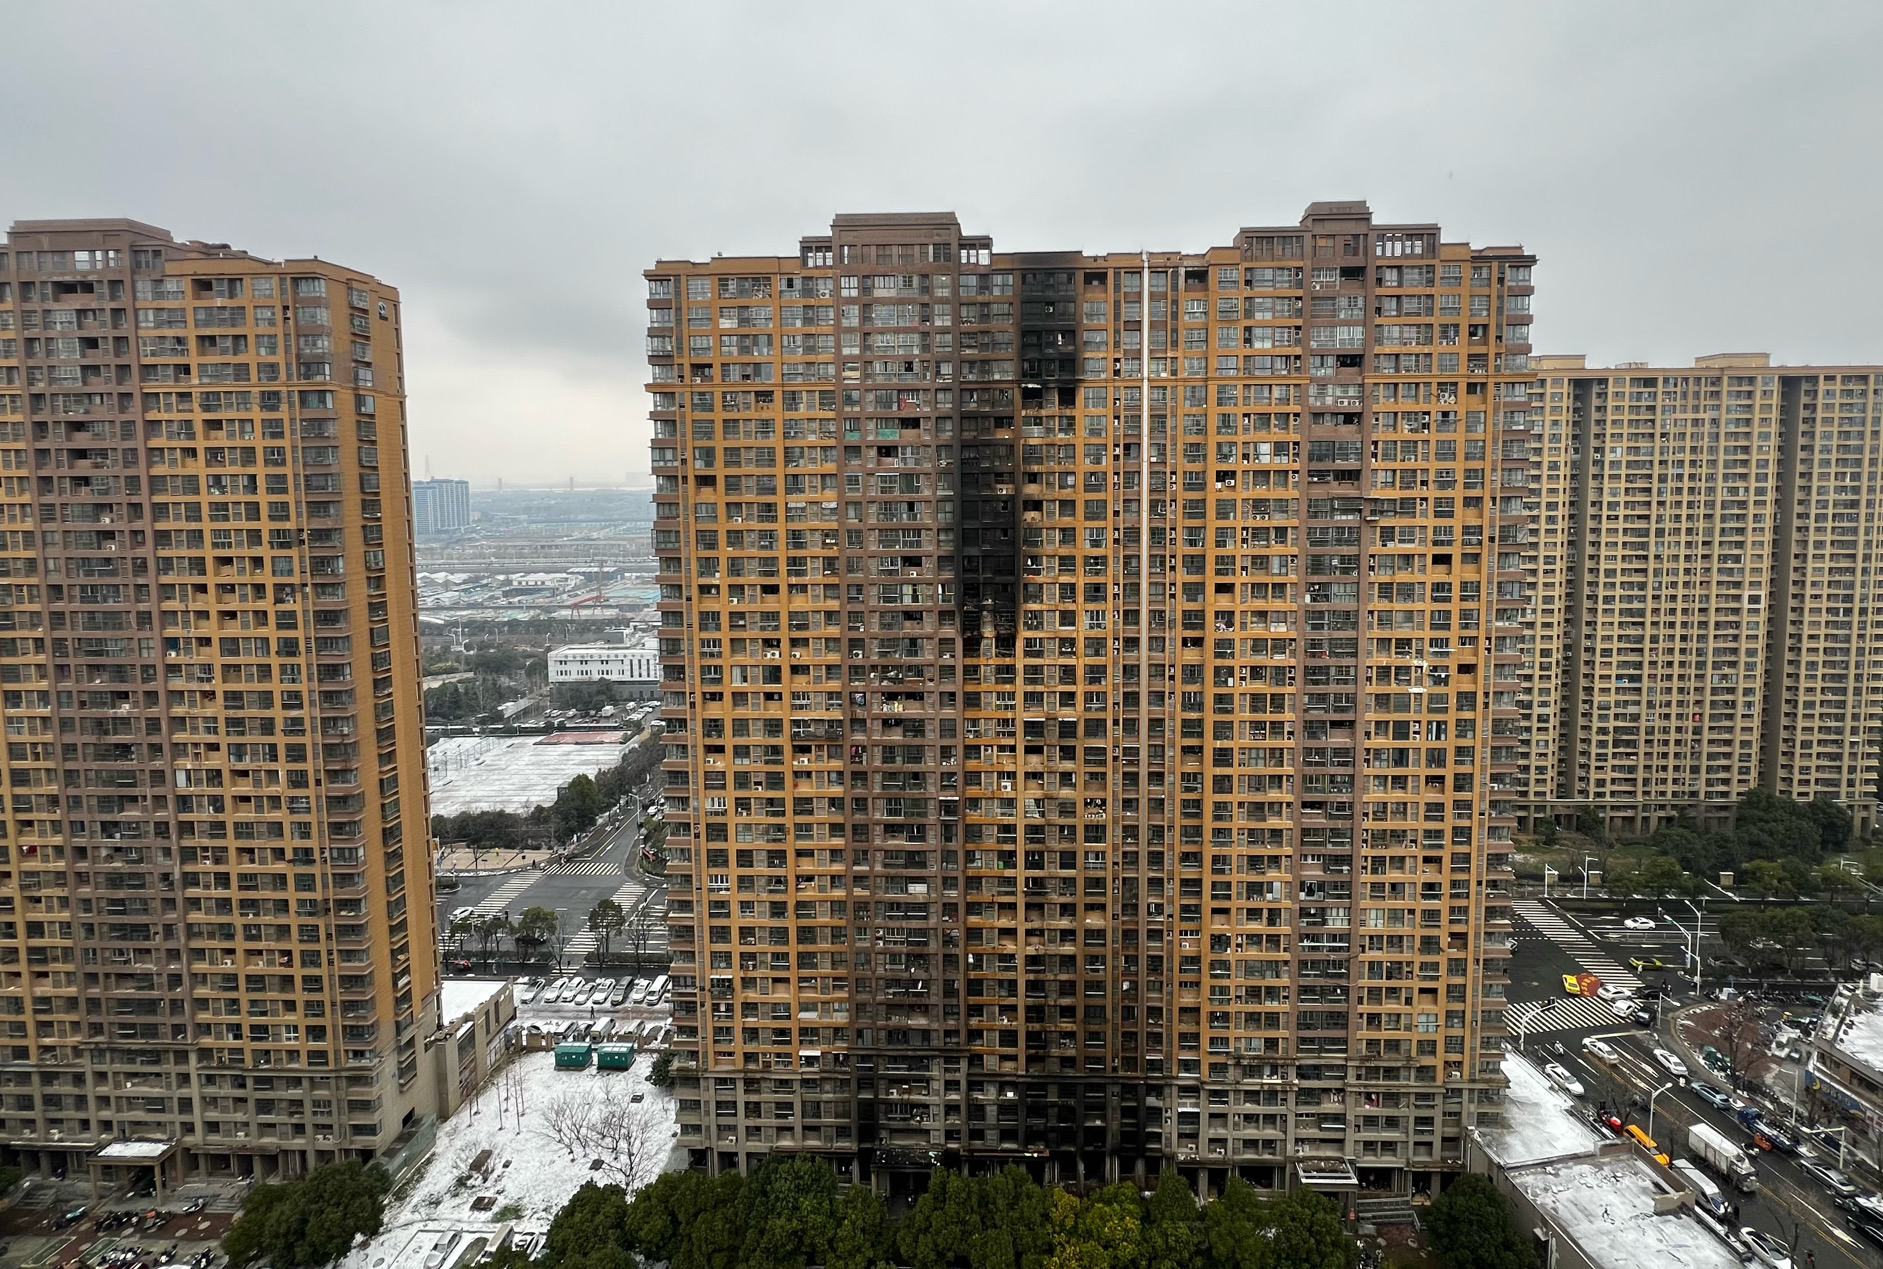 The aftermath of a blaze that engulfed a residential building in Yuhuatai district in Nanjing, Jiangsu province on Friday, killing 15 people. Photo: VCG